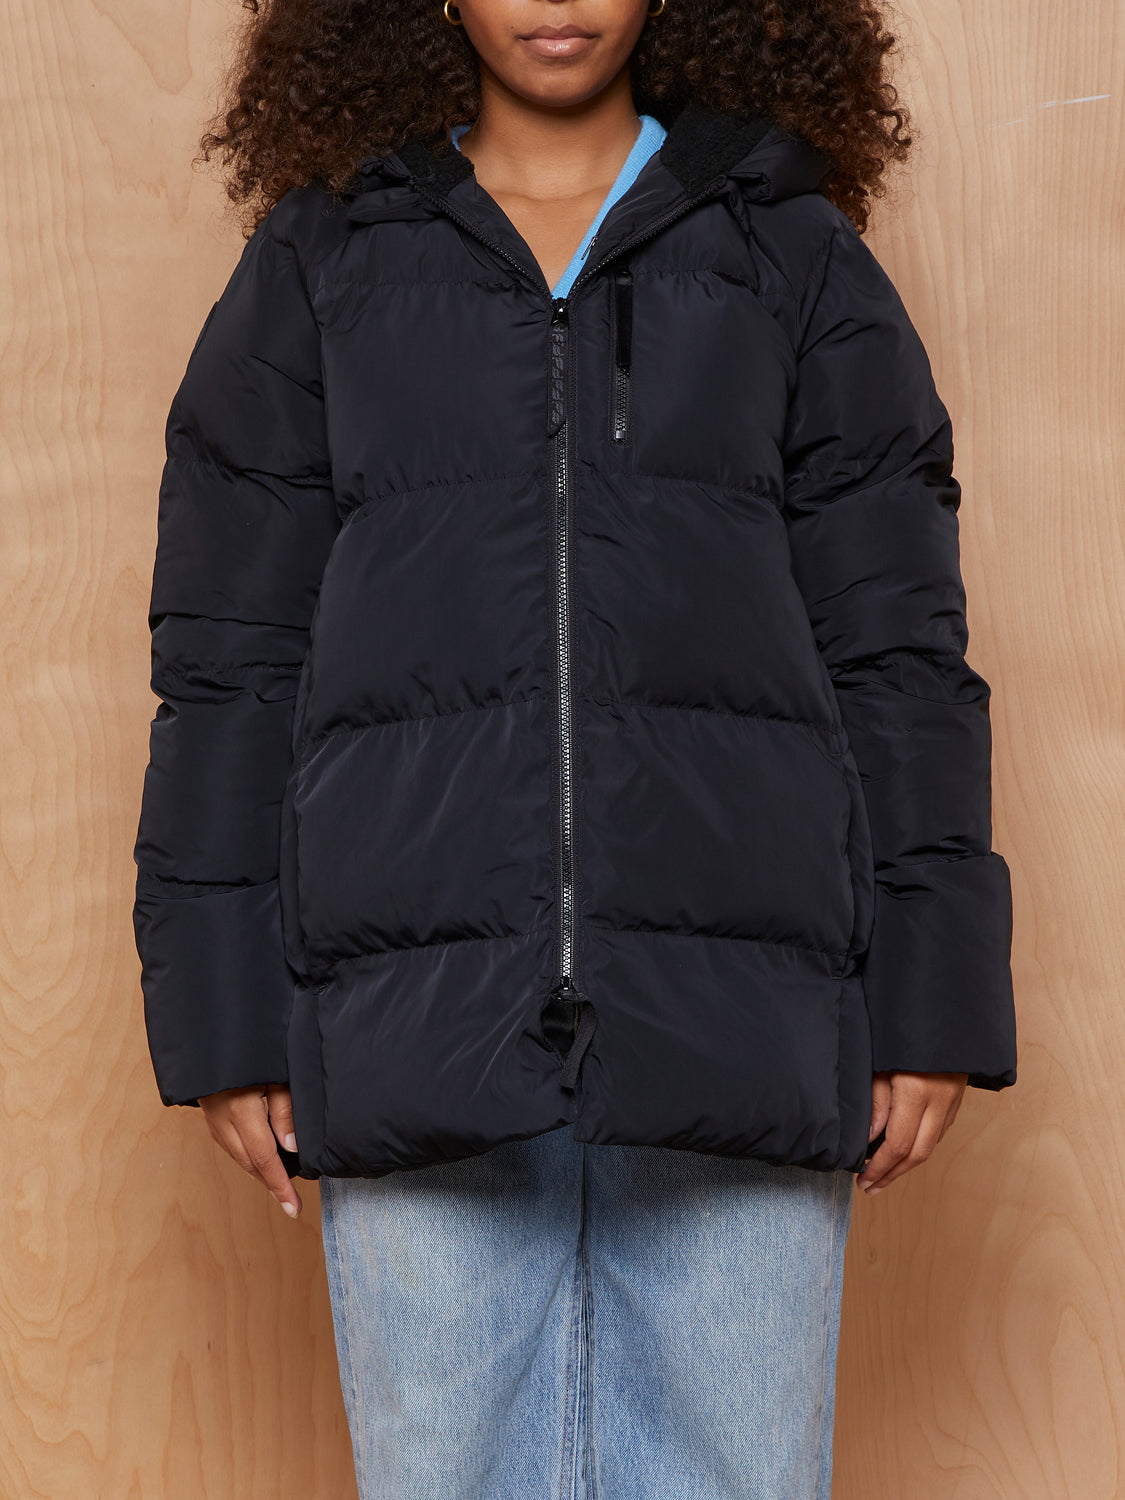 Fabletics Black Puffer Jacket with Teddy Lined Hood – Series